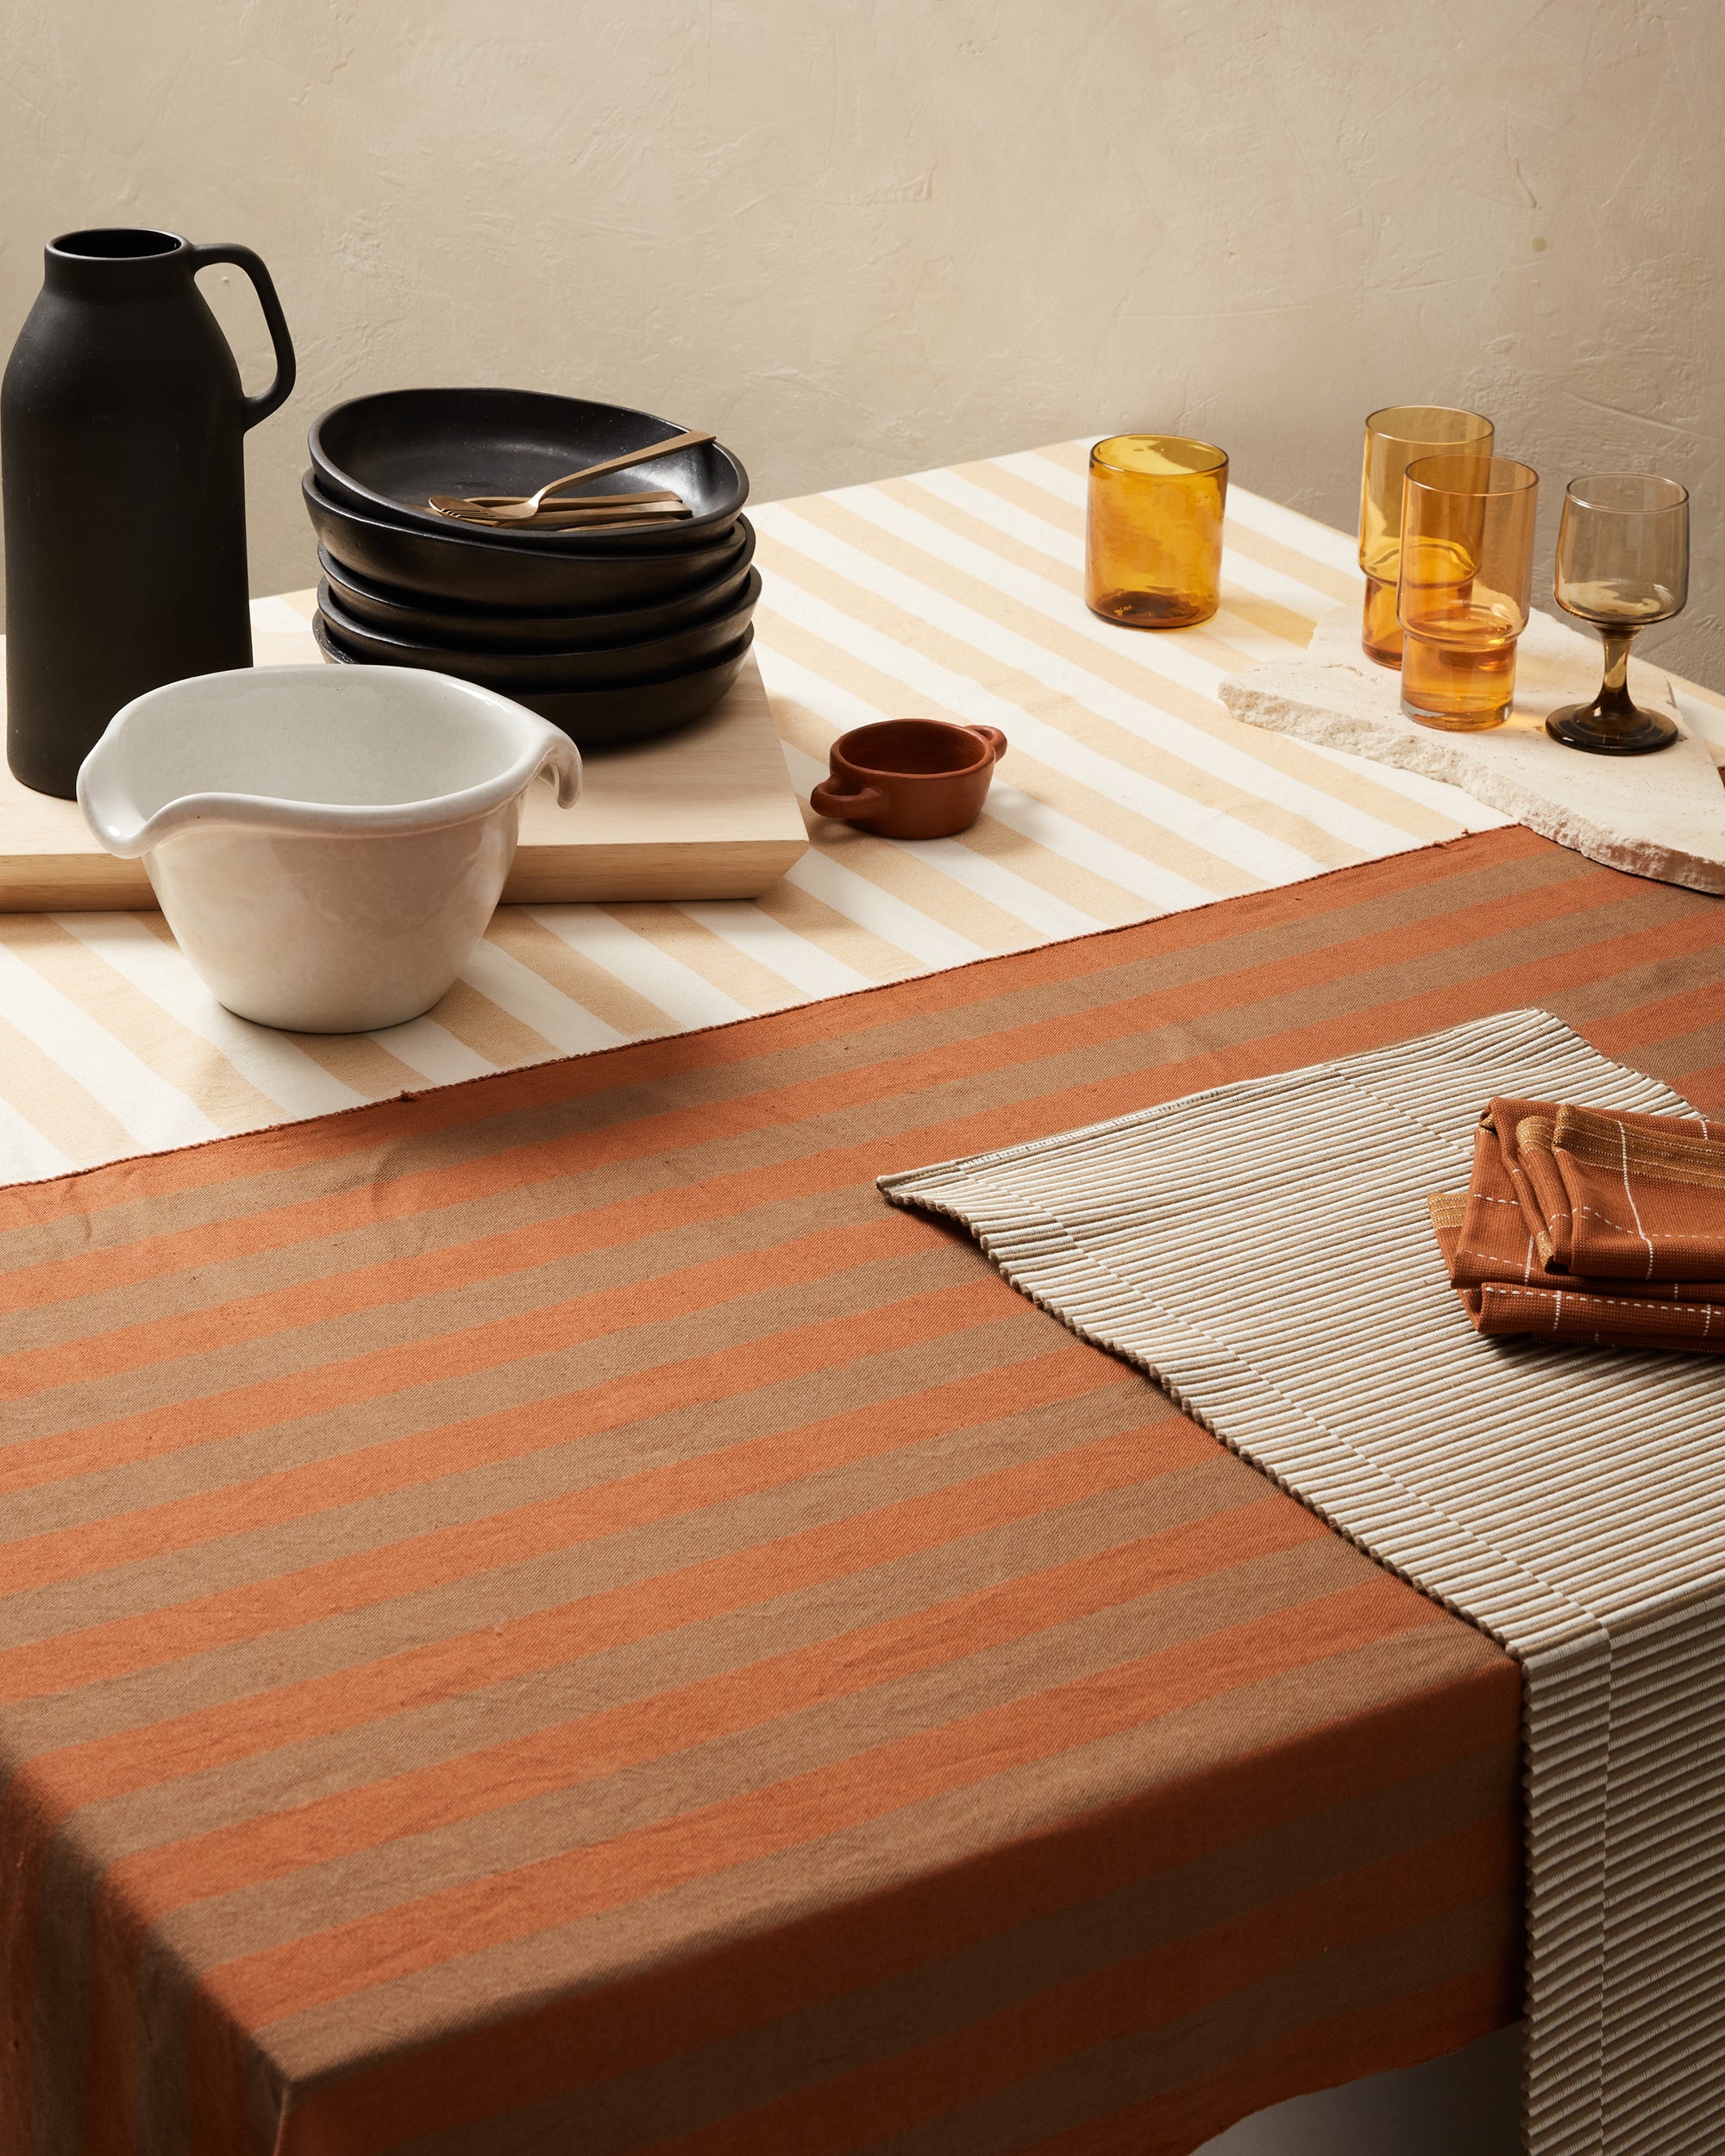 ethically handwoven cotton tablecloth with rust and yellow stripes by MINNA.